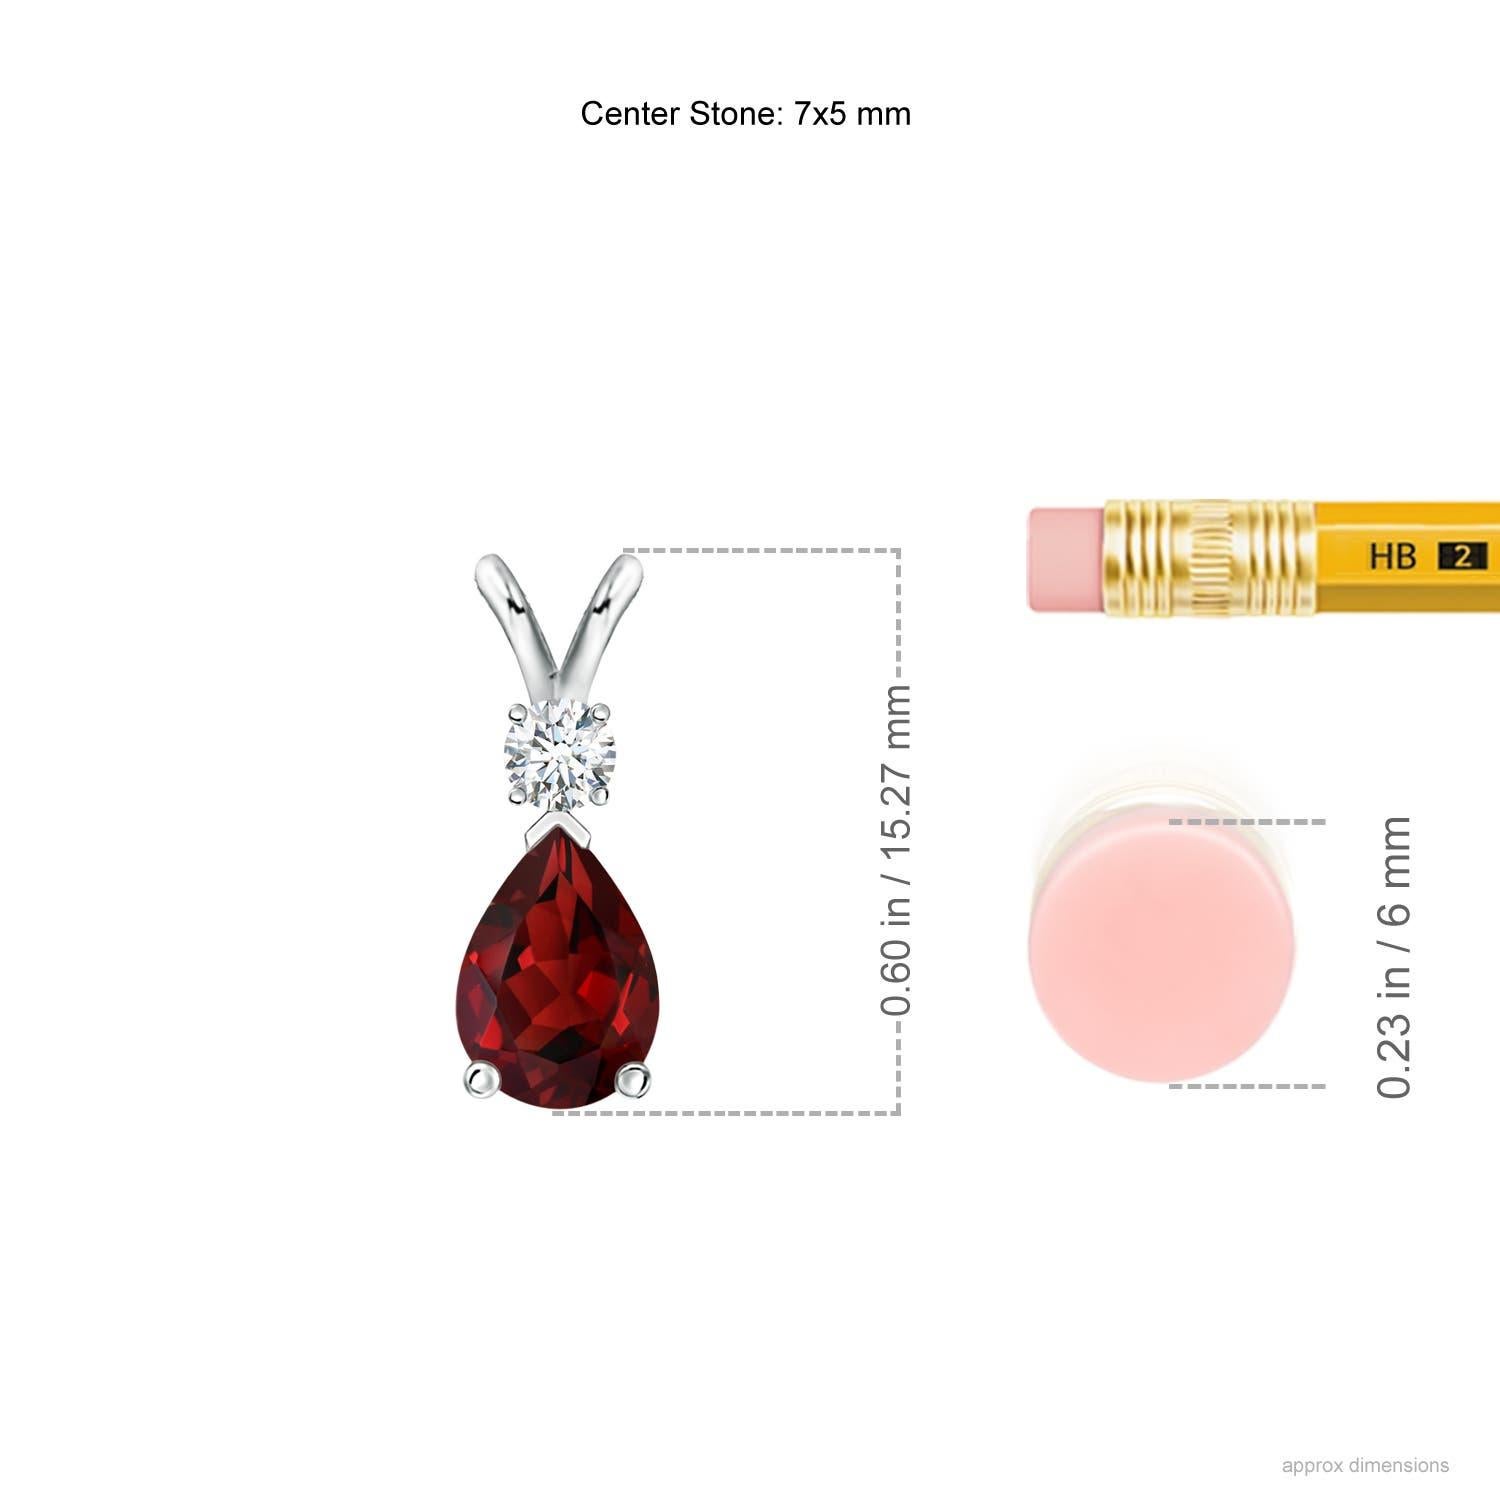 A pear-shaped intense red garnet is secured in a prong setting and embellished with a diamond accent on the top. Simple yet stunning, this teardrop garnet pendant with V bale is sculpted in 14k white gold.
Garnet is the Birthstone for January and